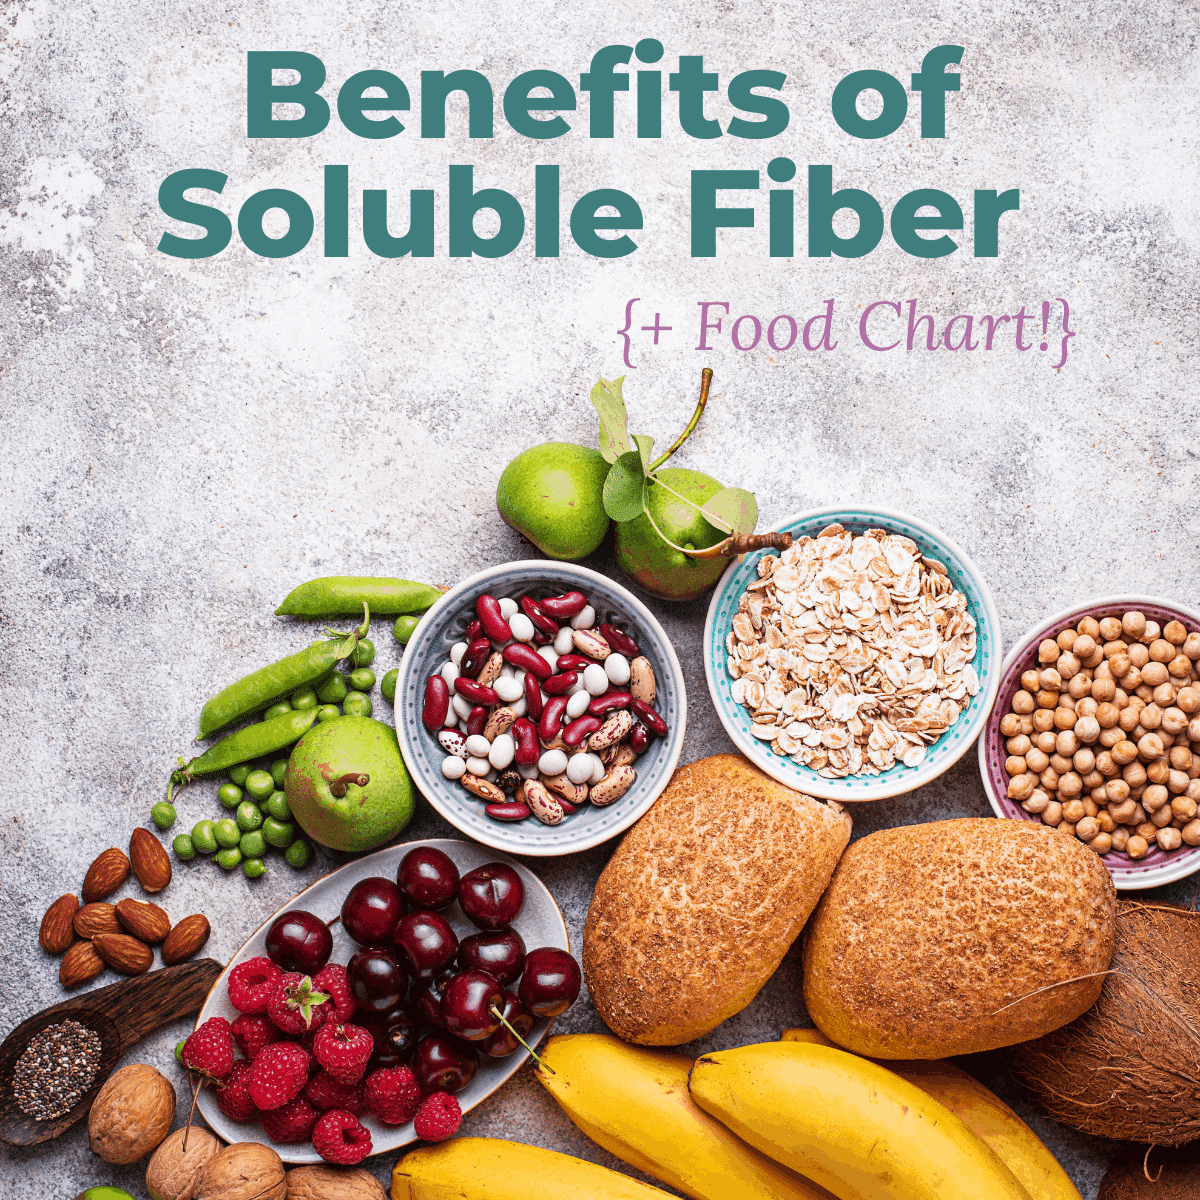 benefits of soluble fiber + soluble fiber food chart on cement table with Whole Foods scattered on bottom